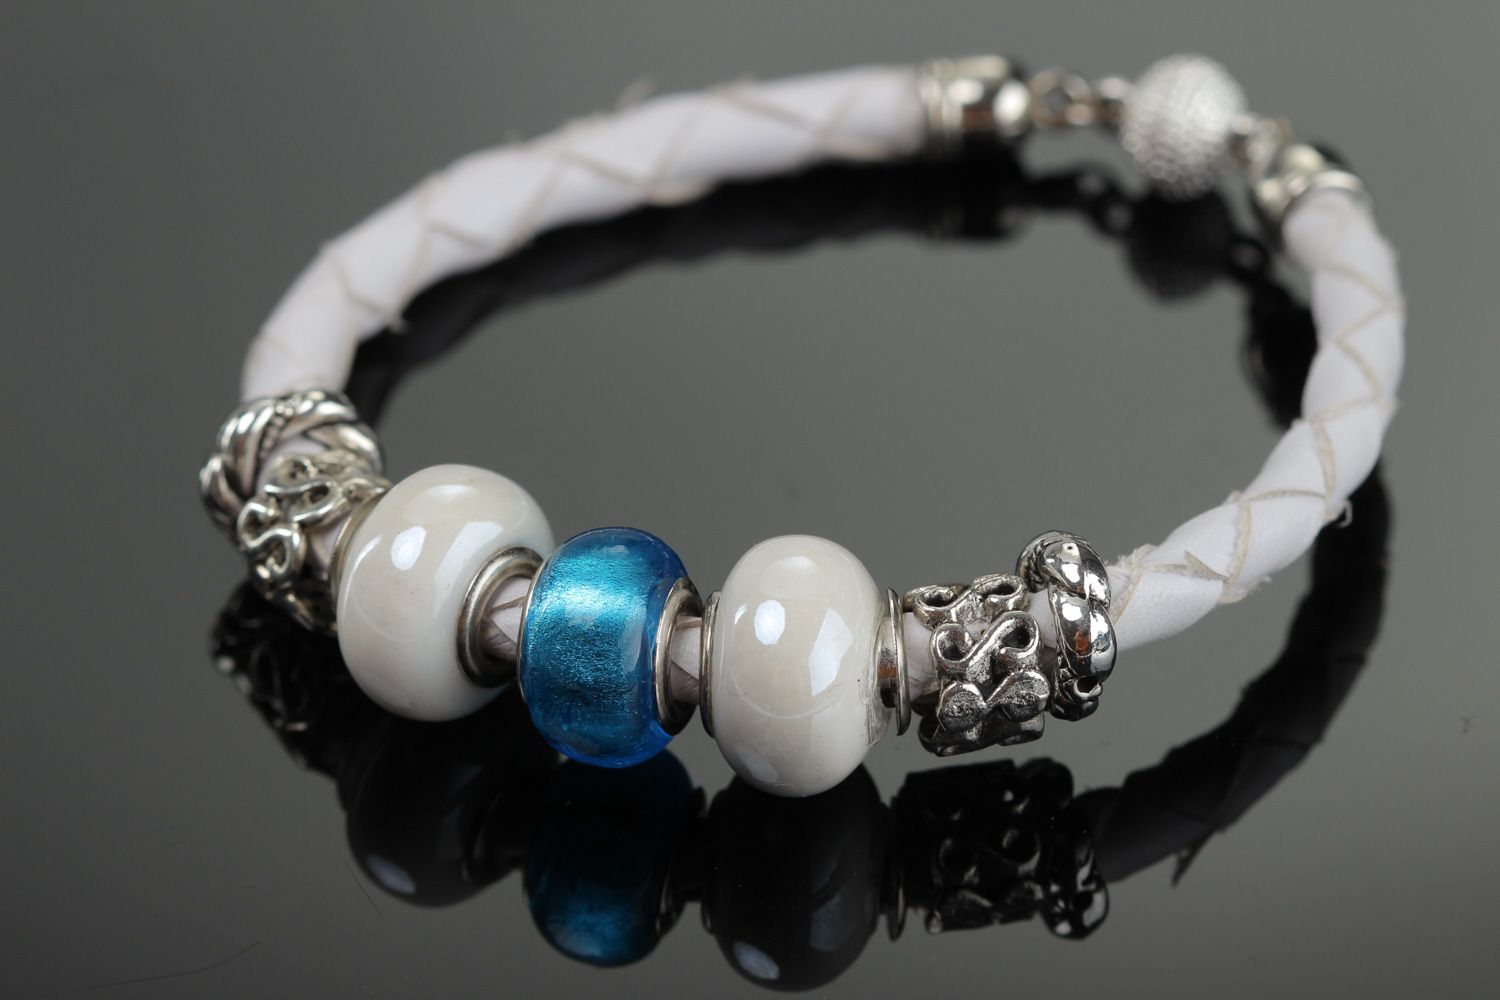 Tender handmade wrist bracelet woven of white faux leather with beads for women photo 1